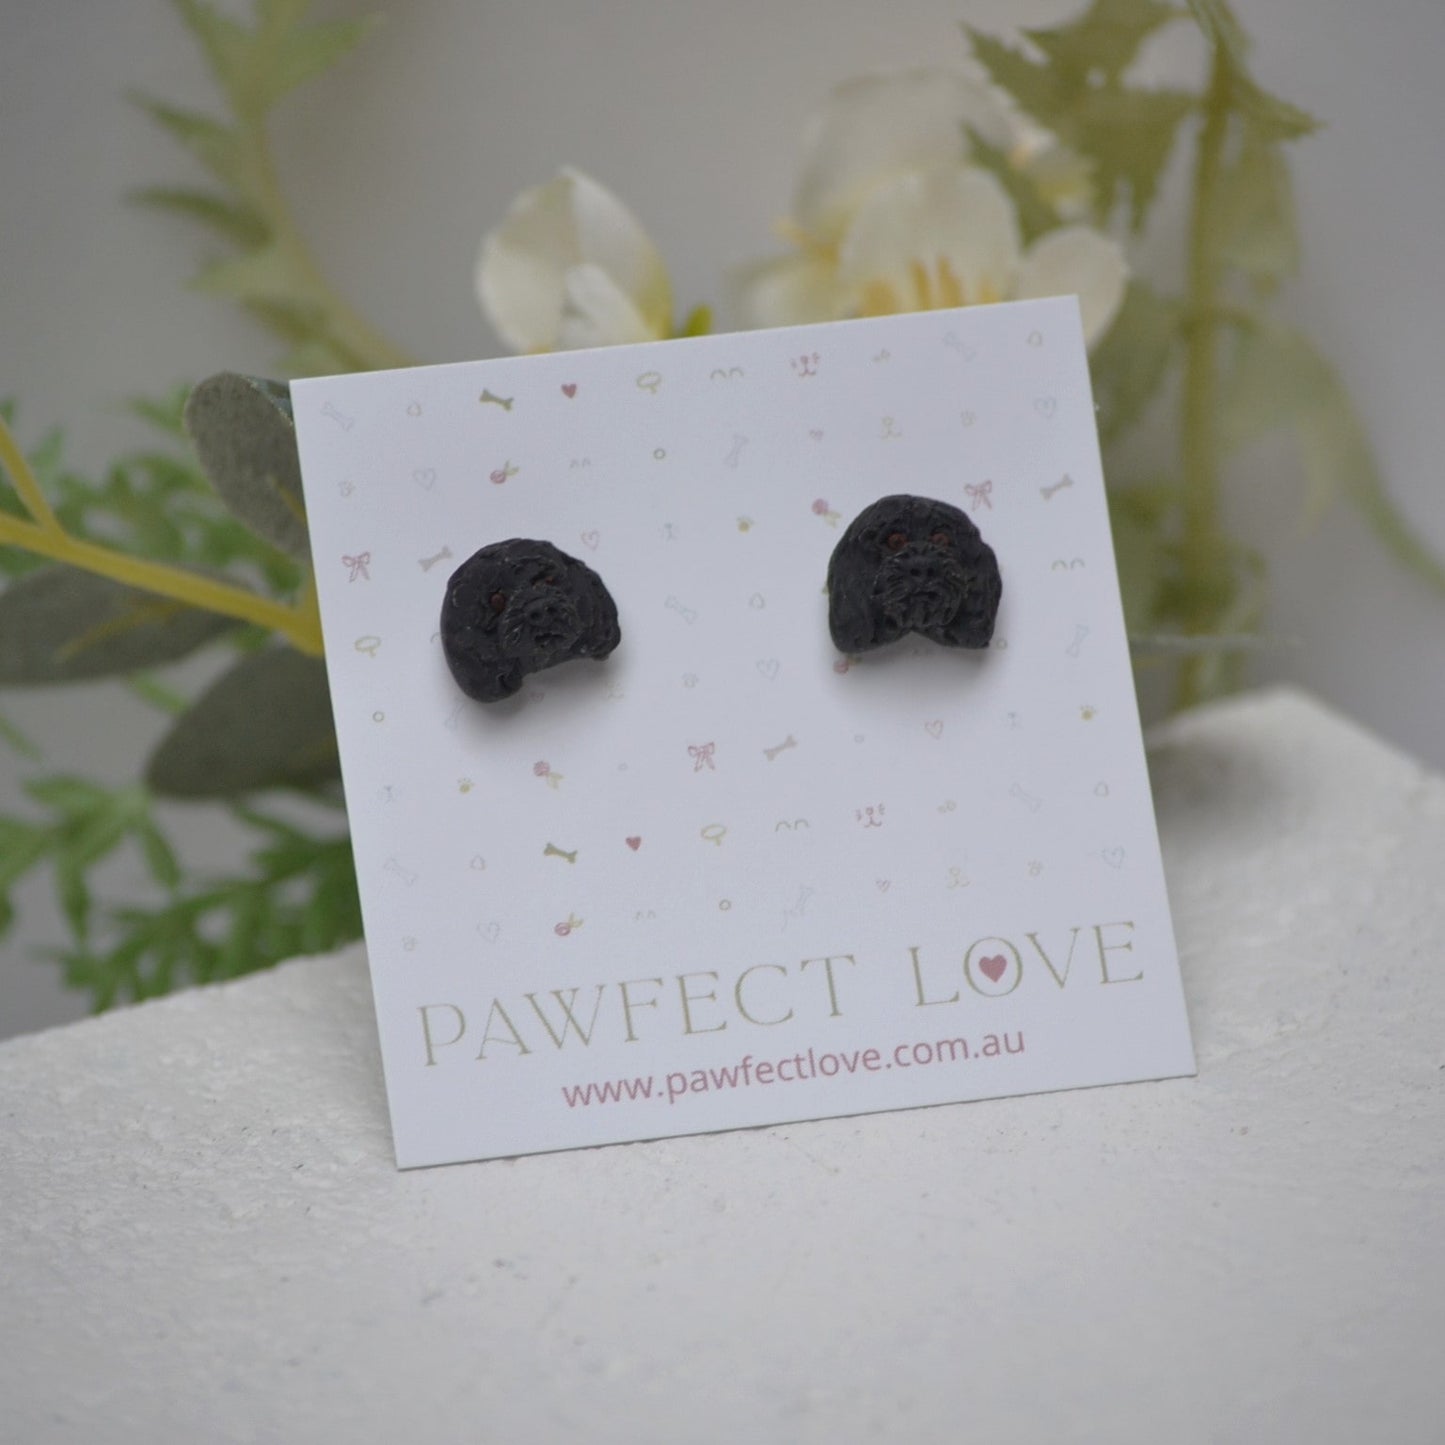 Handmade black poodle stud earrings by Pawfect Love, positioned in front of dried flower arrangement